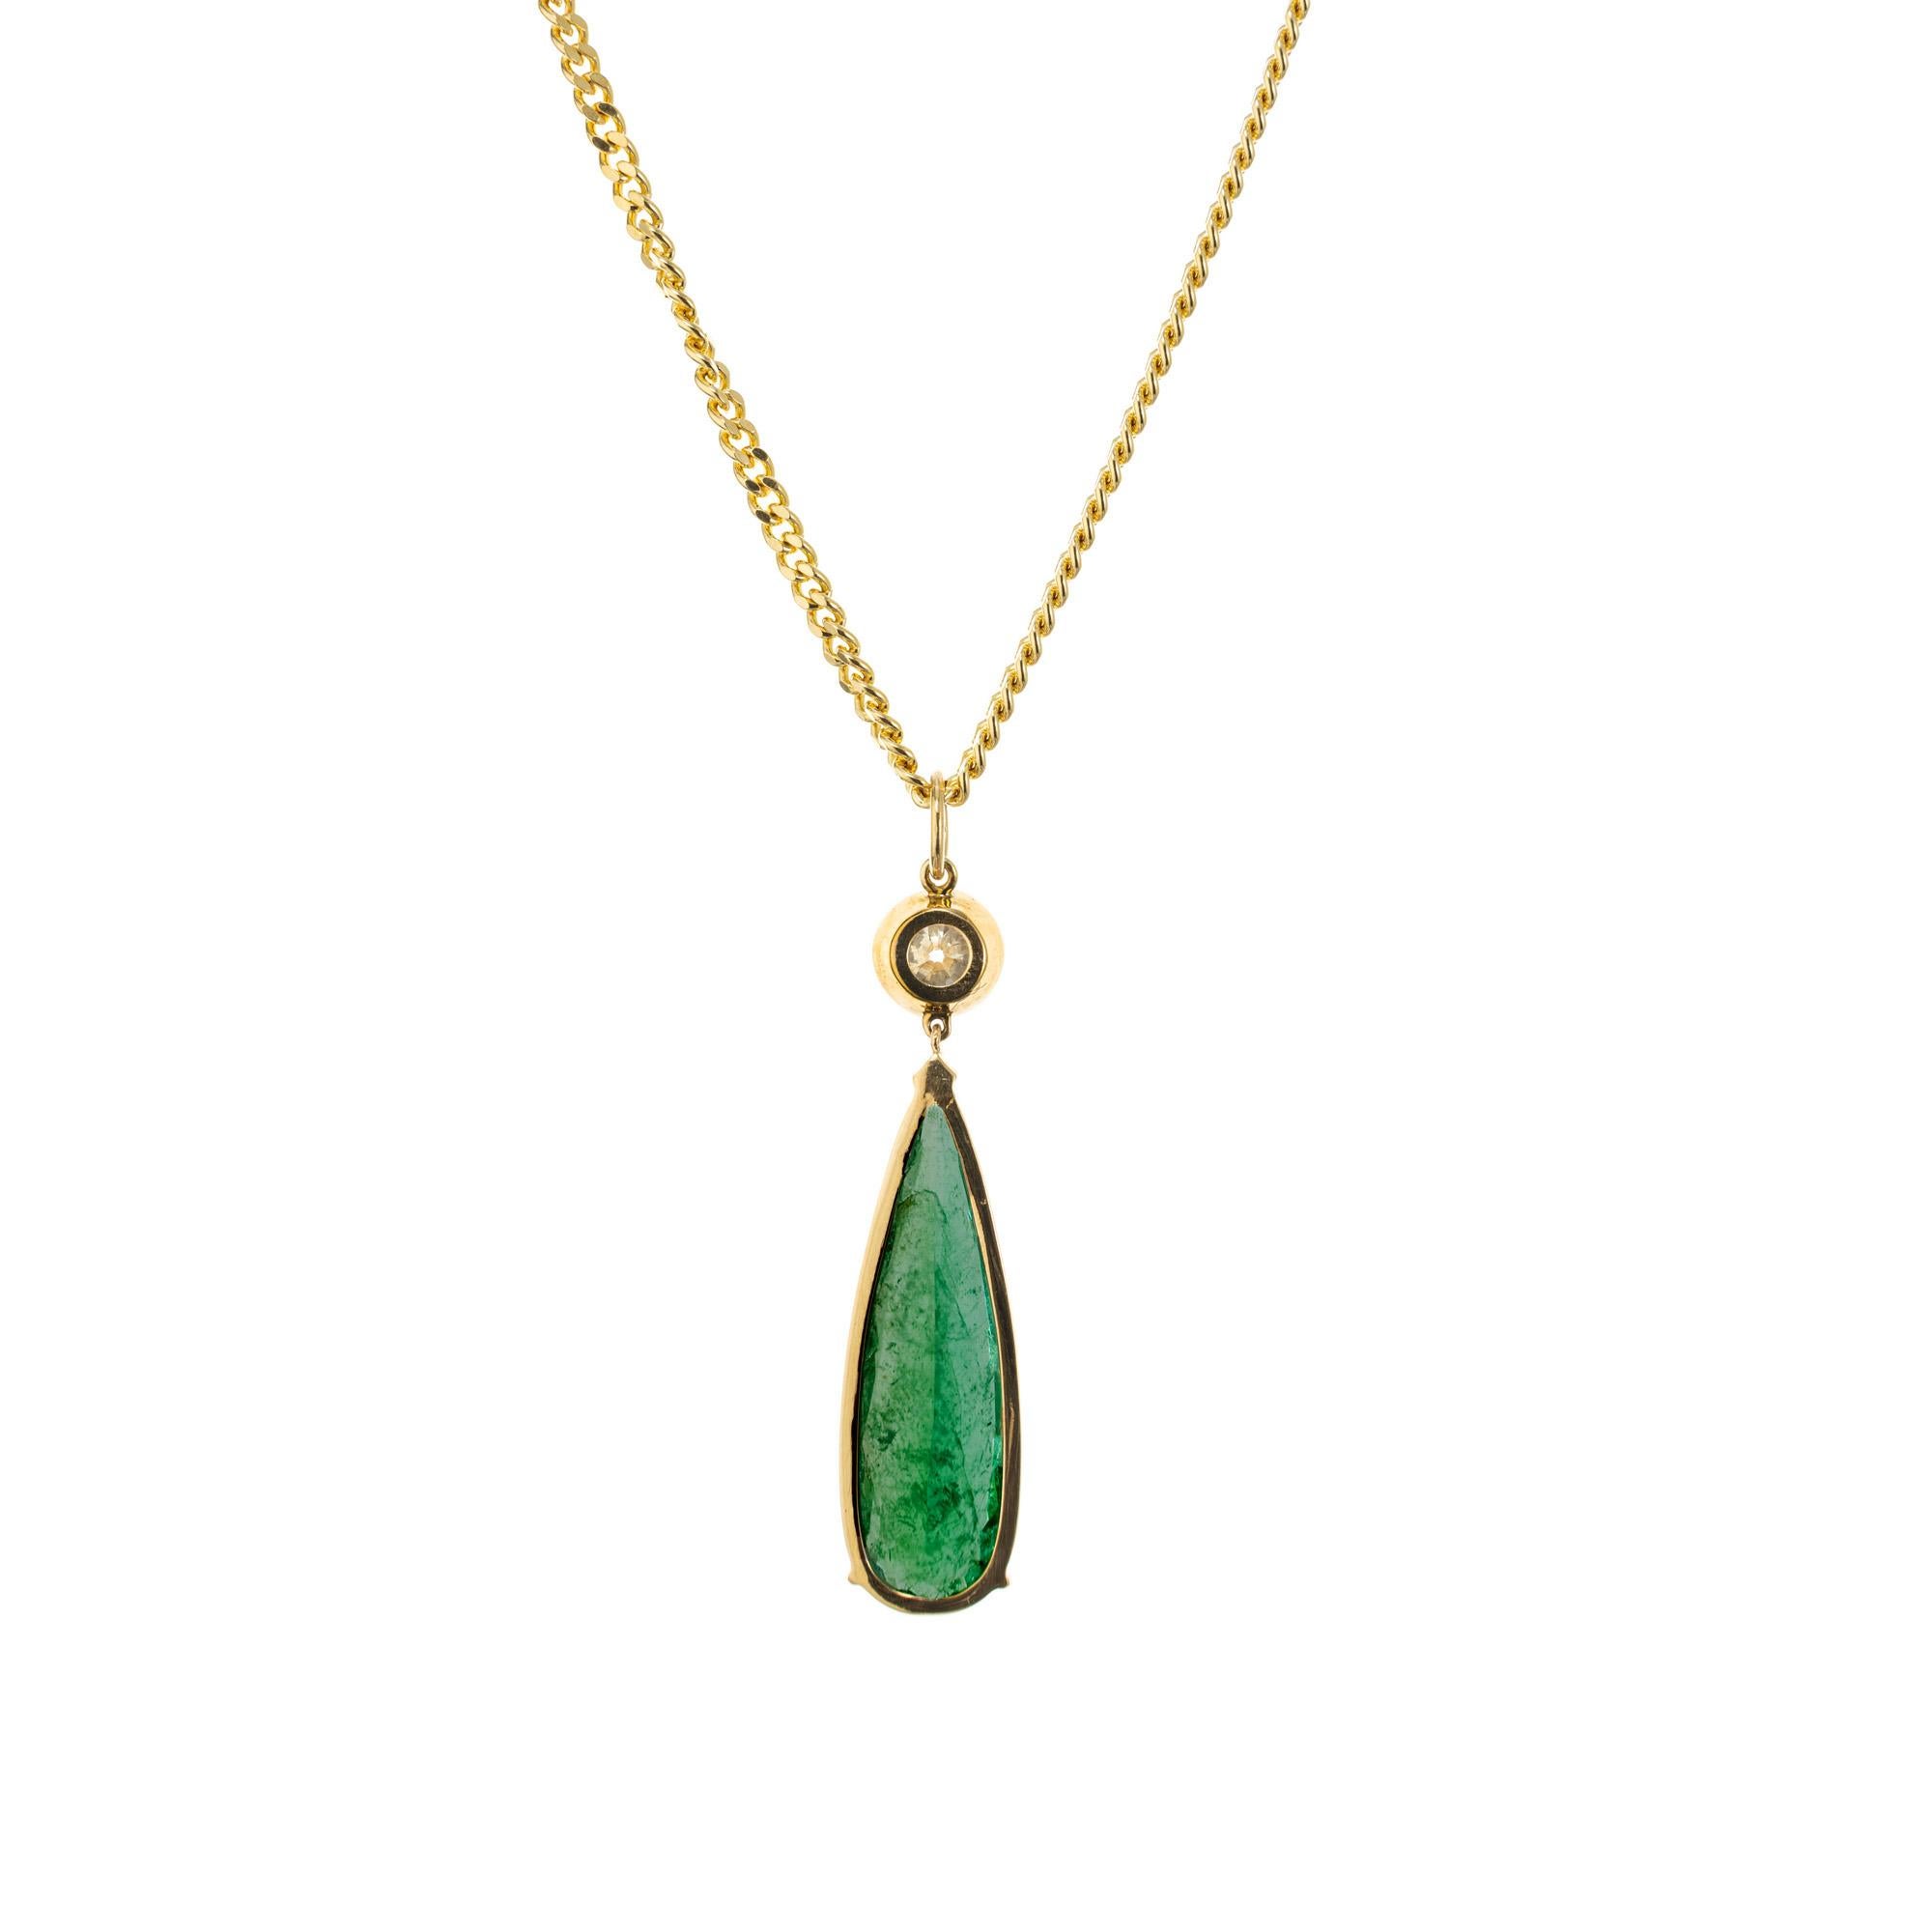 Peter Suchy GIA 10.09 Carat Columbian Pear Emerald Diamond Gold Pendant Necklace For Sale 1